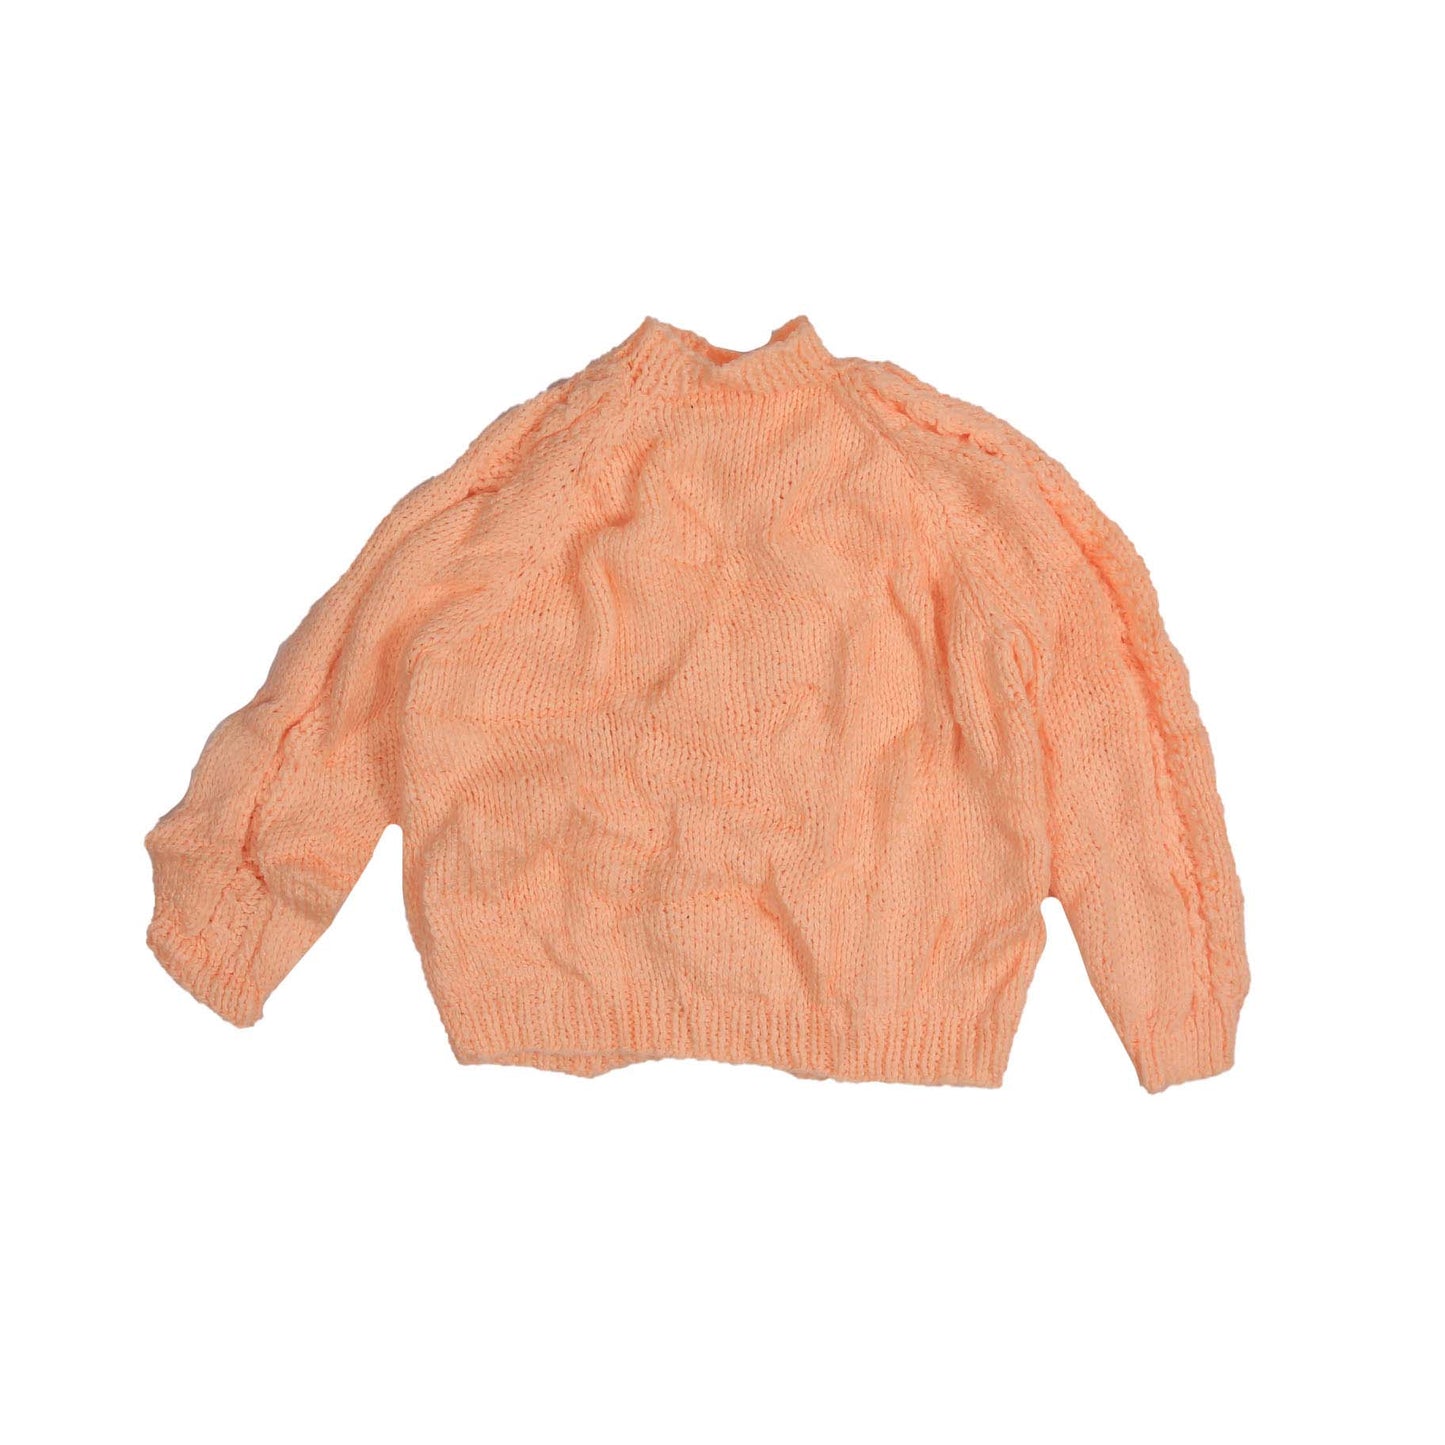 CLASSIC PEACH KNITTED CARDIGAN SWEATER